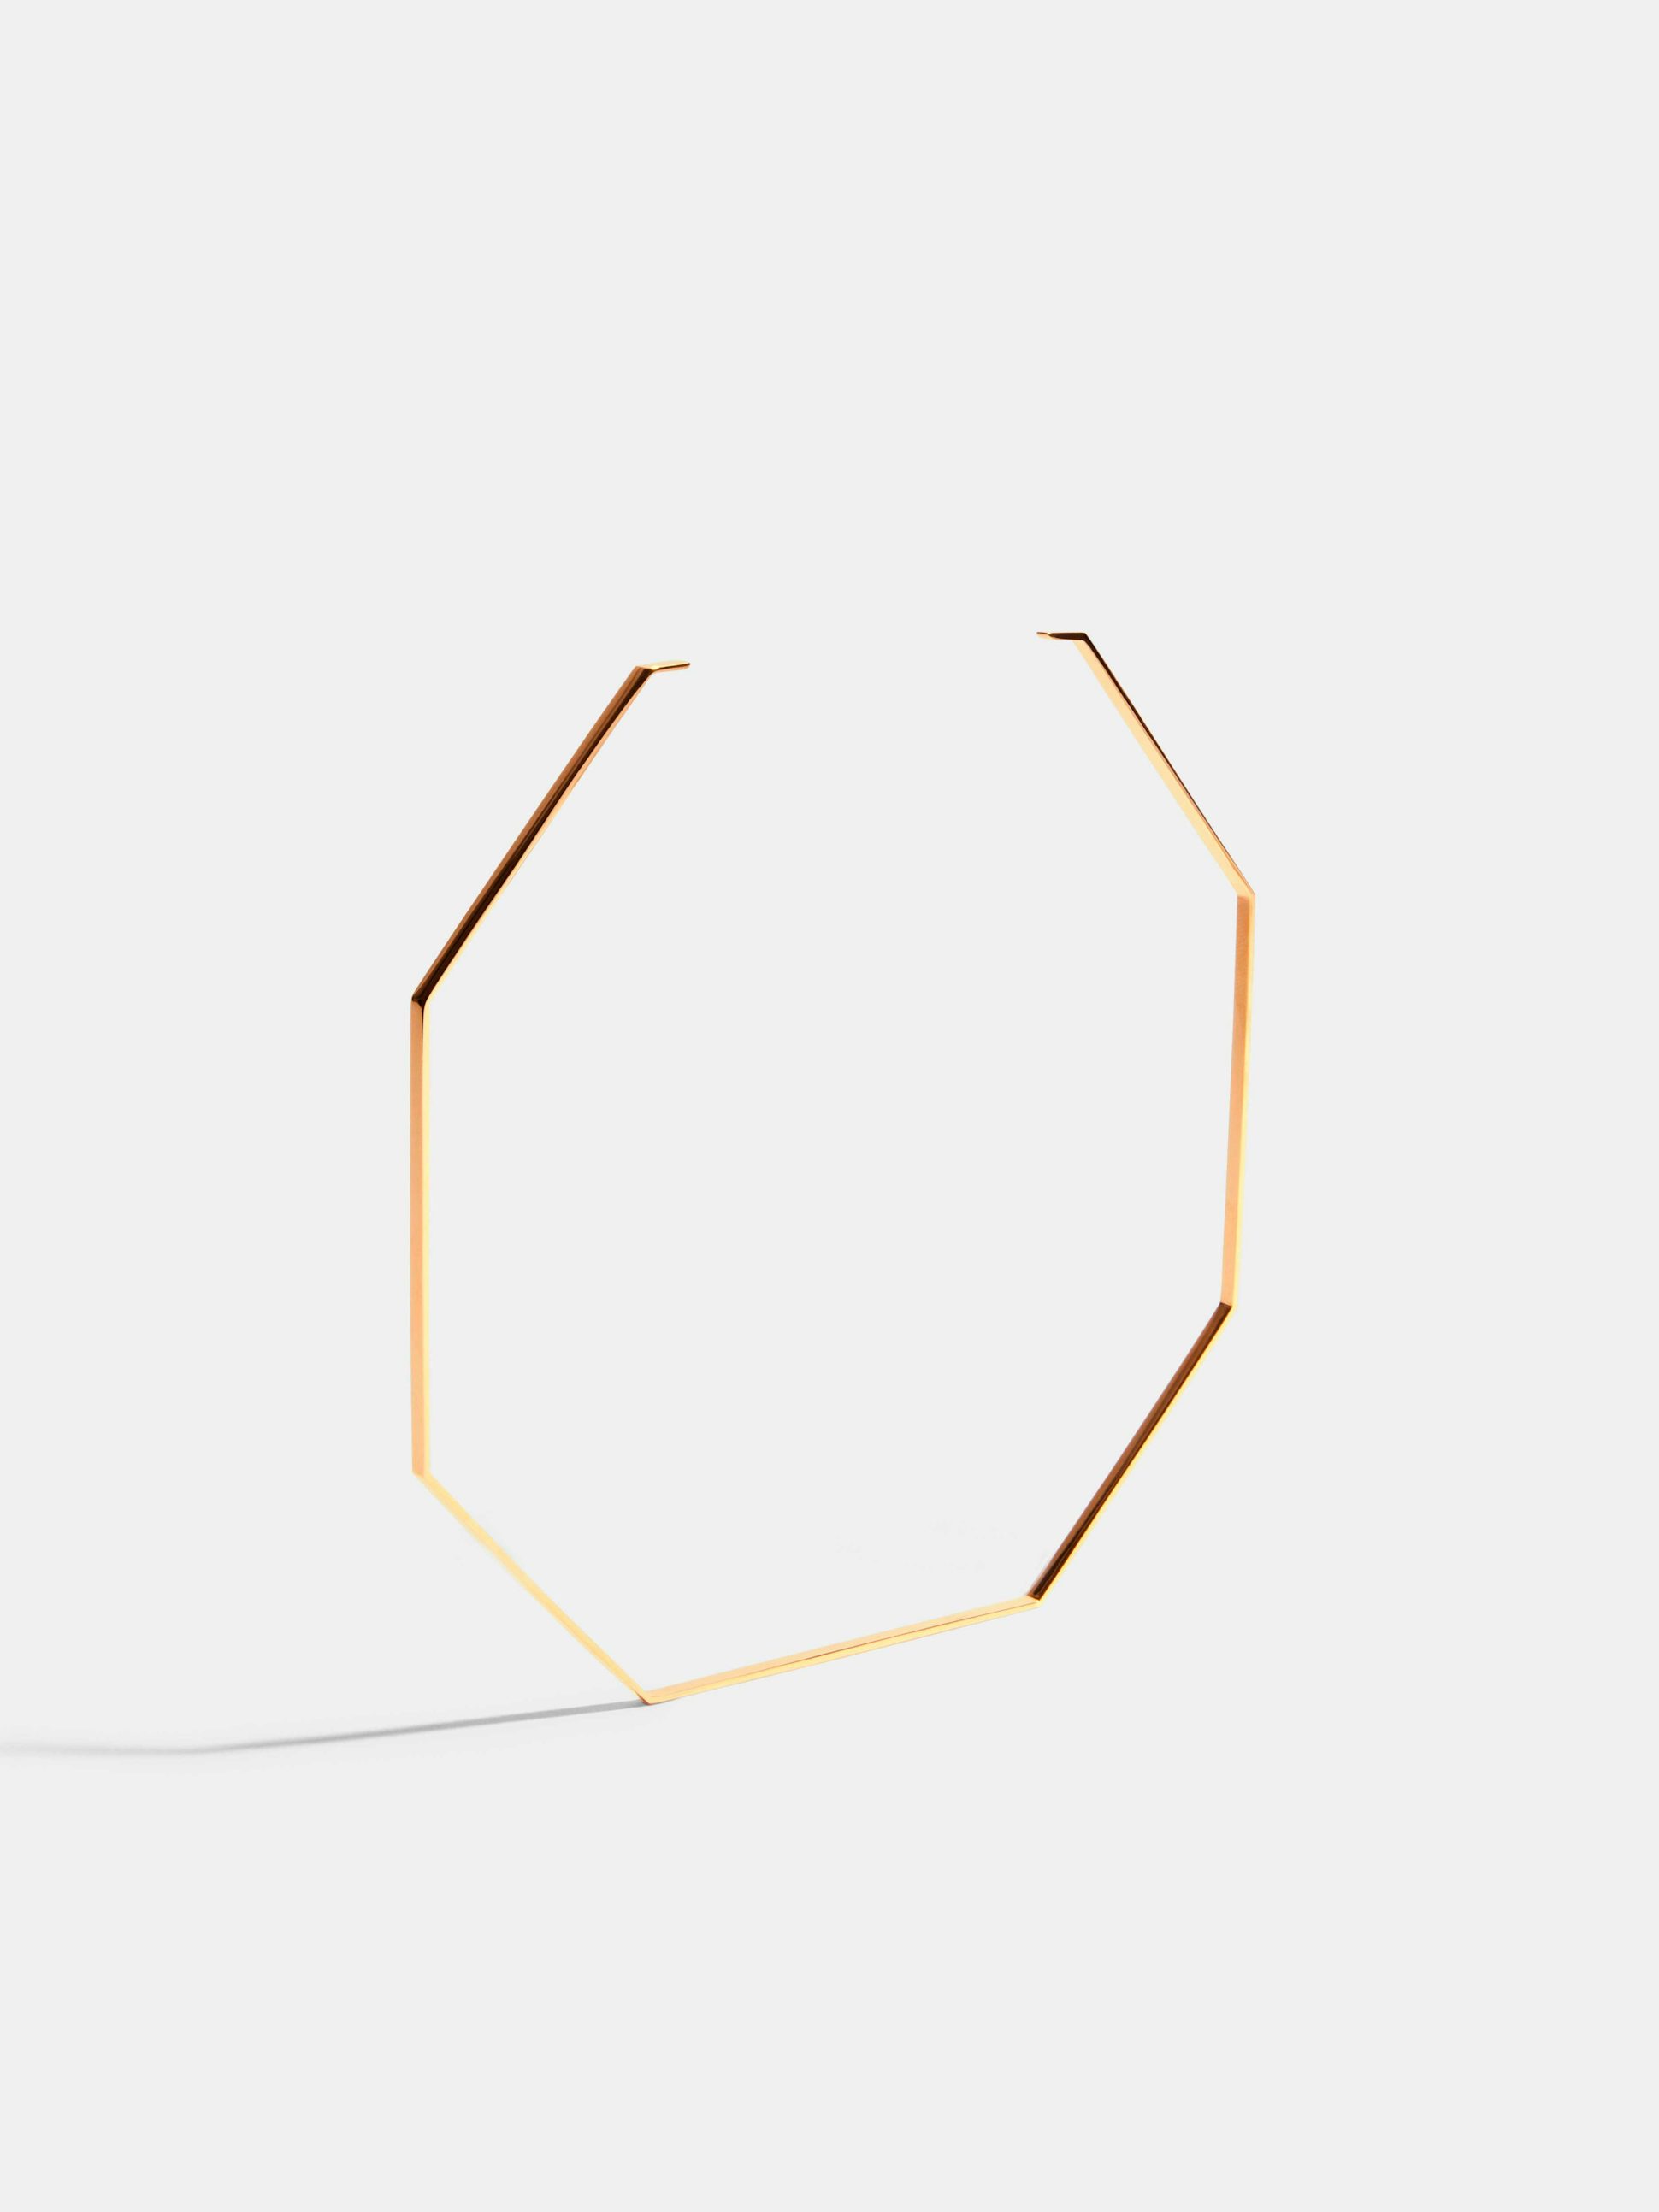 Octogone choker in 18k Fairmined ethical yellow gold